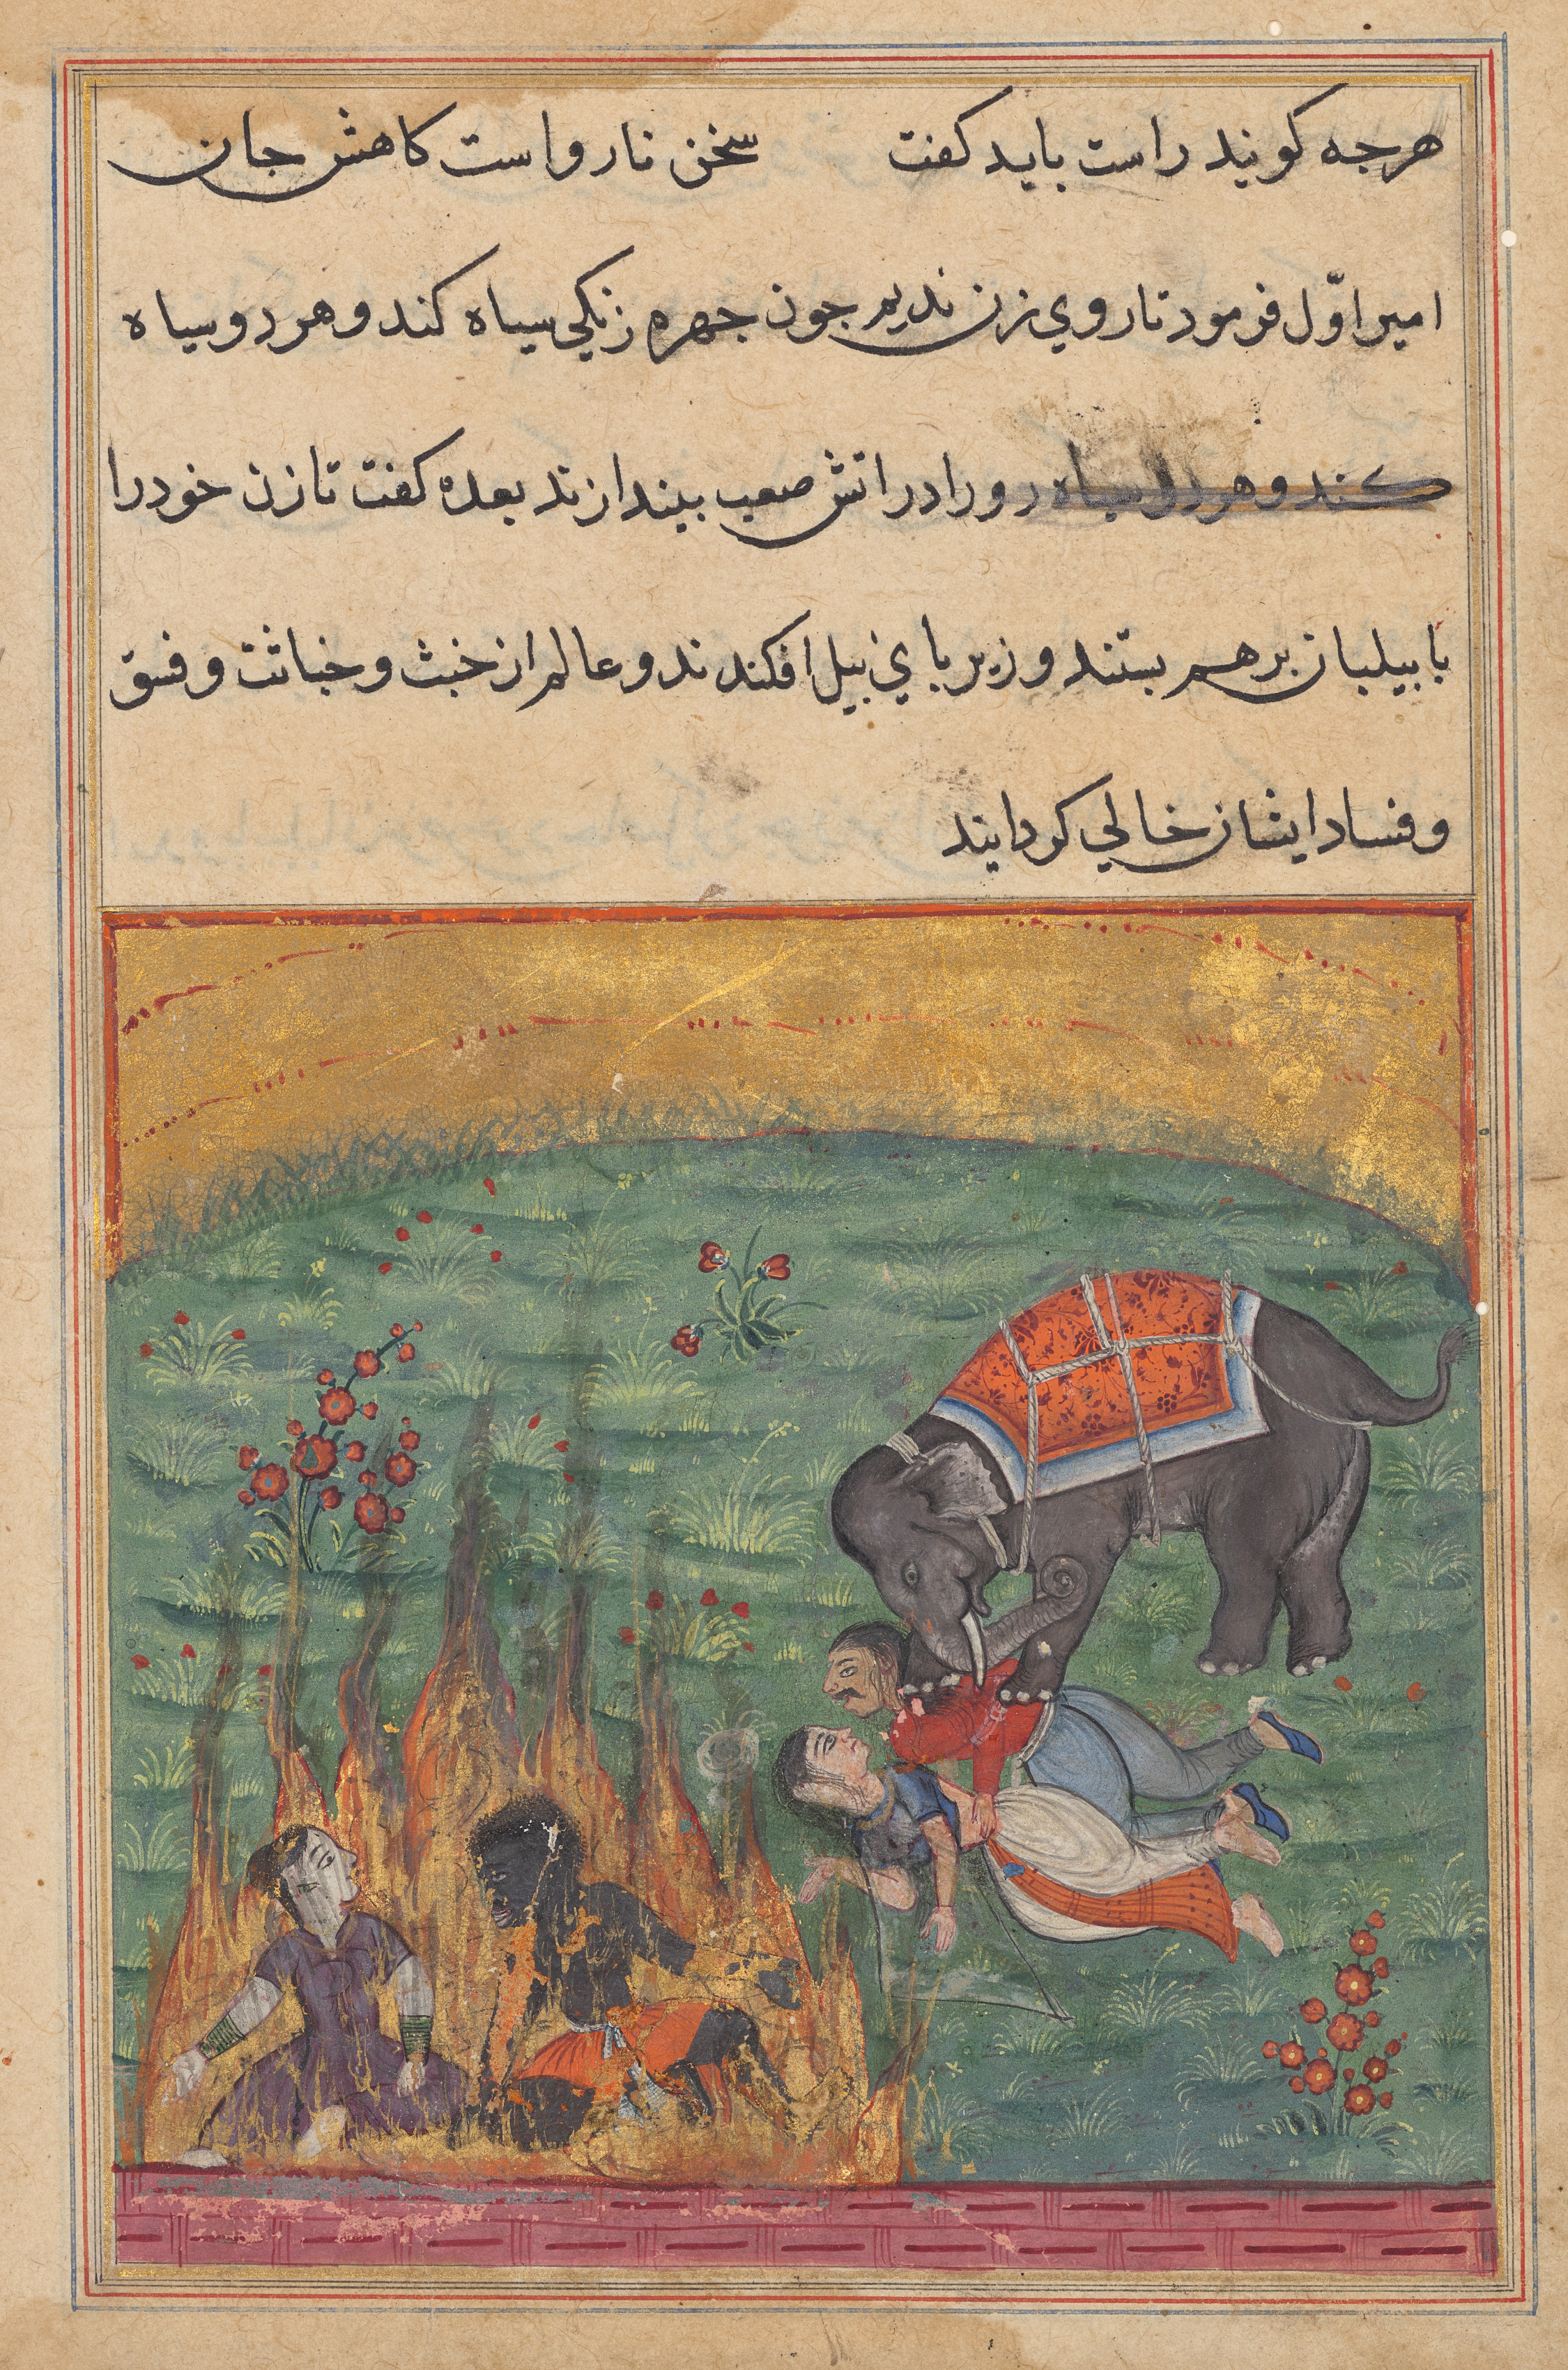 As punishment, the jester’s wife and the Zangi are thrown into fire and the emir’s wife and the mahout are trampled by an elephant, from a Tuti-nama (Tales of a Parrot), Twenty-second Night